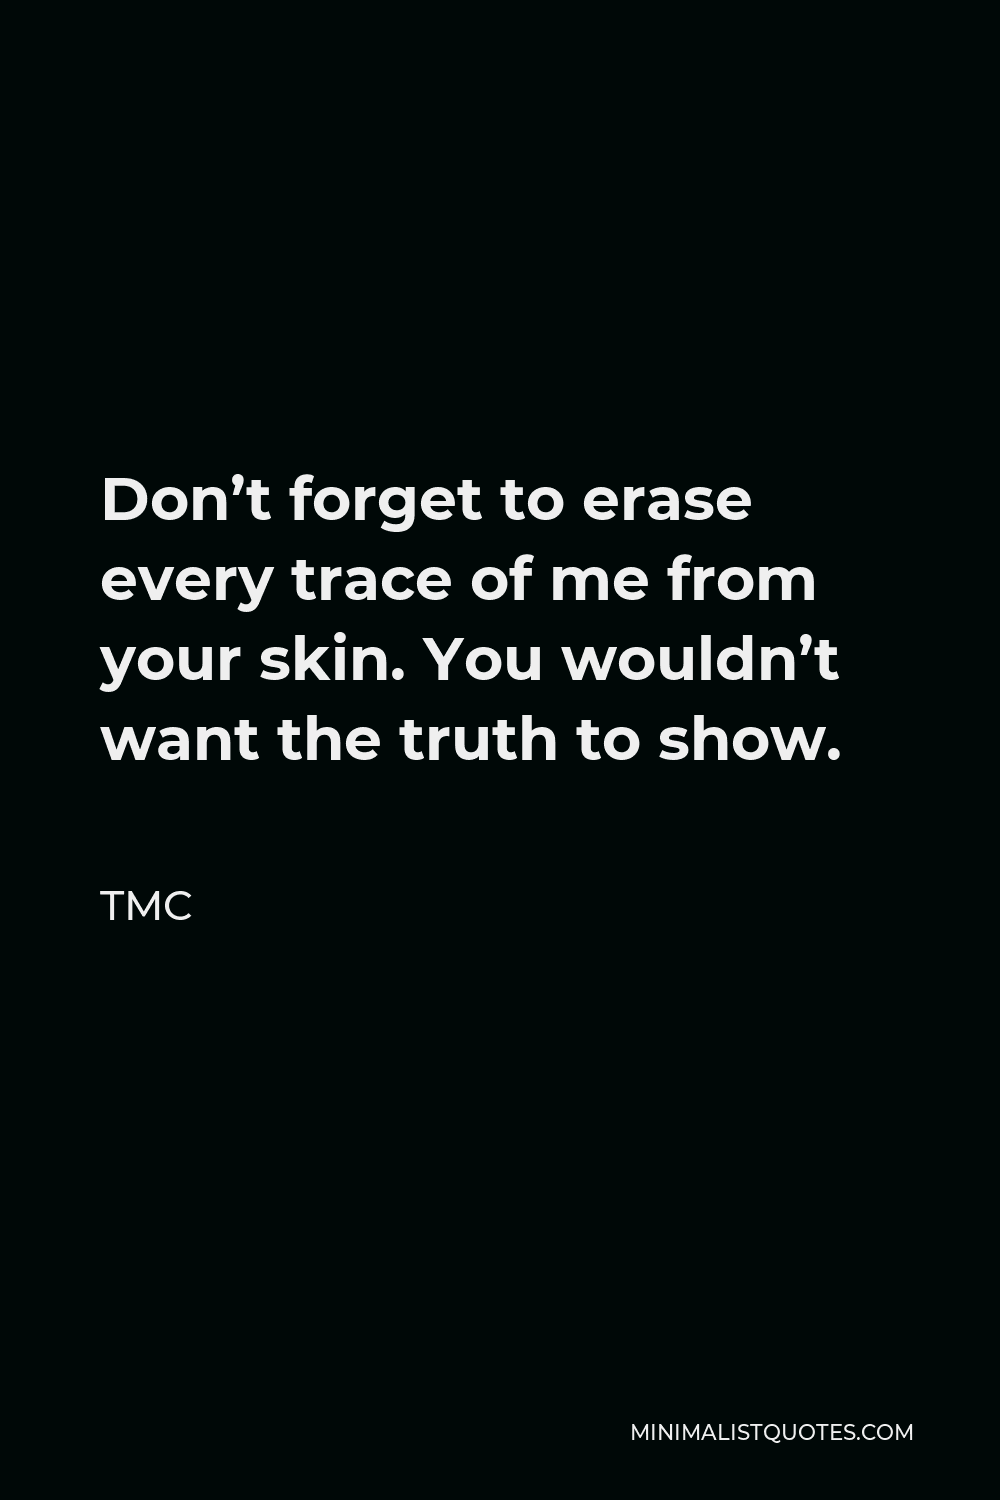 TMC Quote - Don’t forget to erase every trace of me from your skin. You wouldn’t want the truth to show.